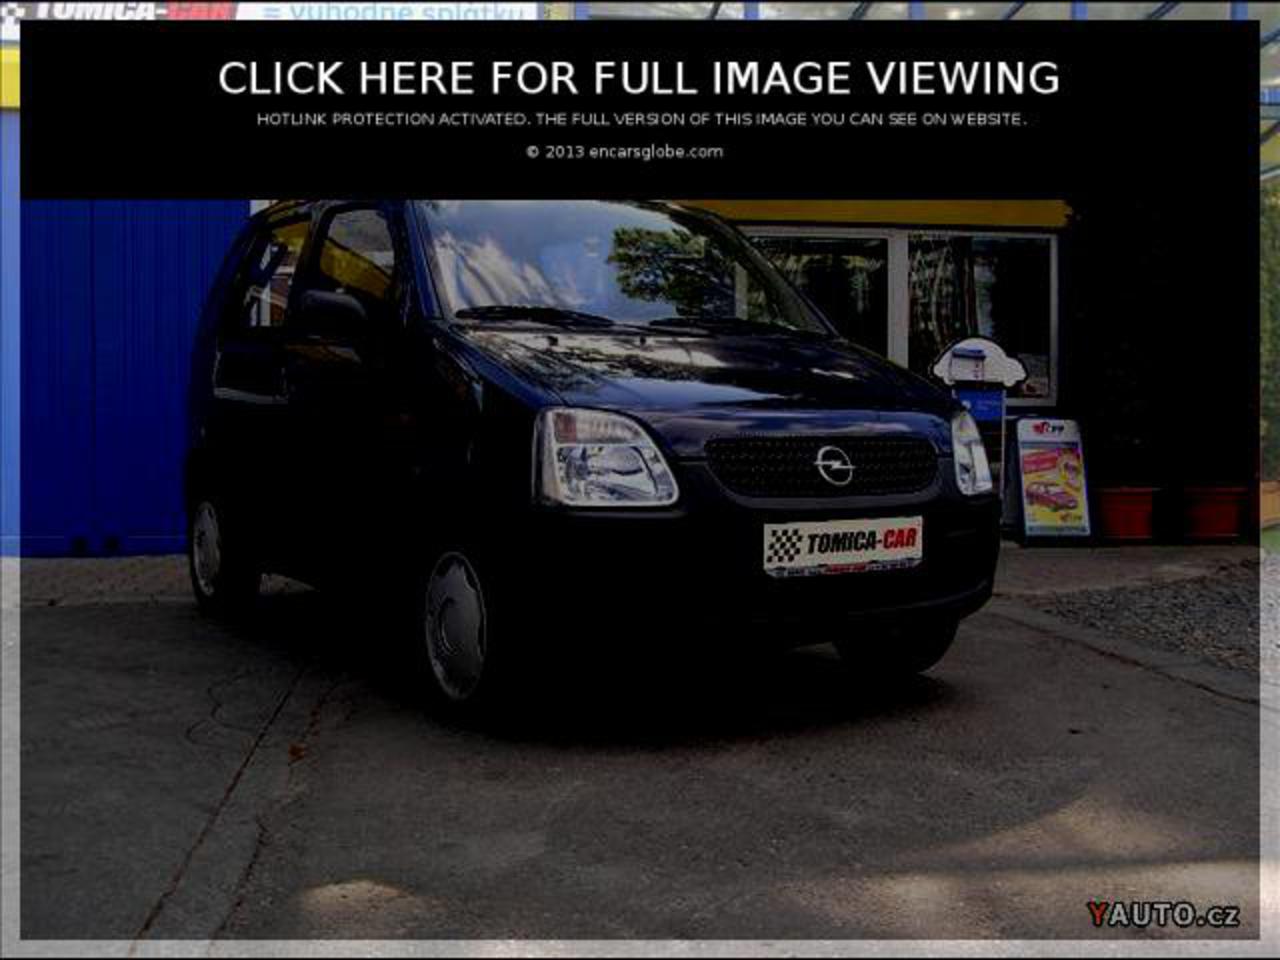 Opel Agila 12 Photo Gallery: Photo #05 out of 9, Image Size - 450 ...